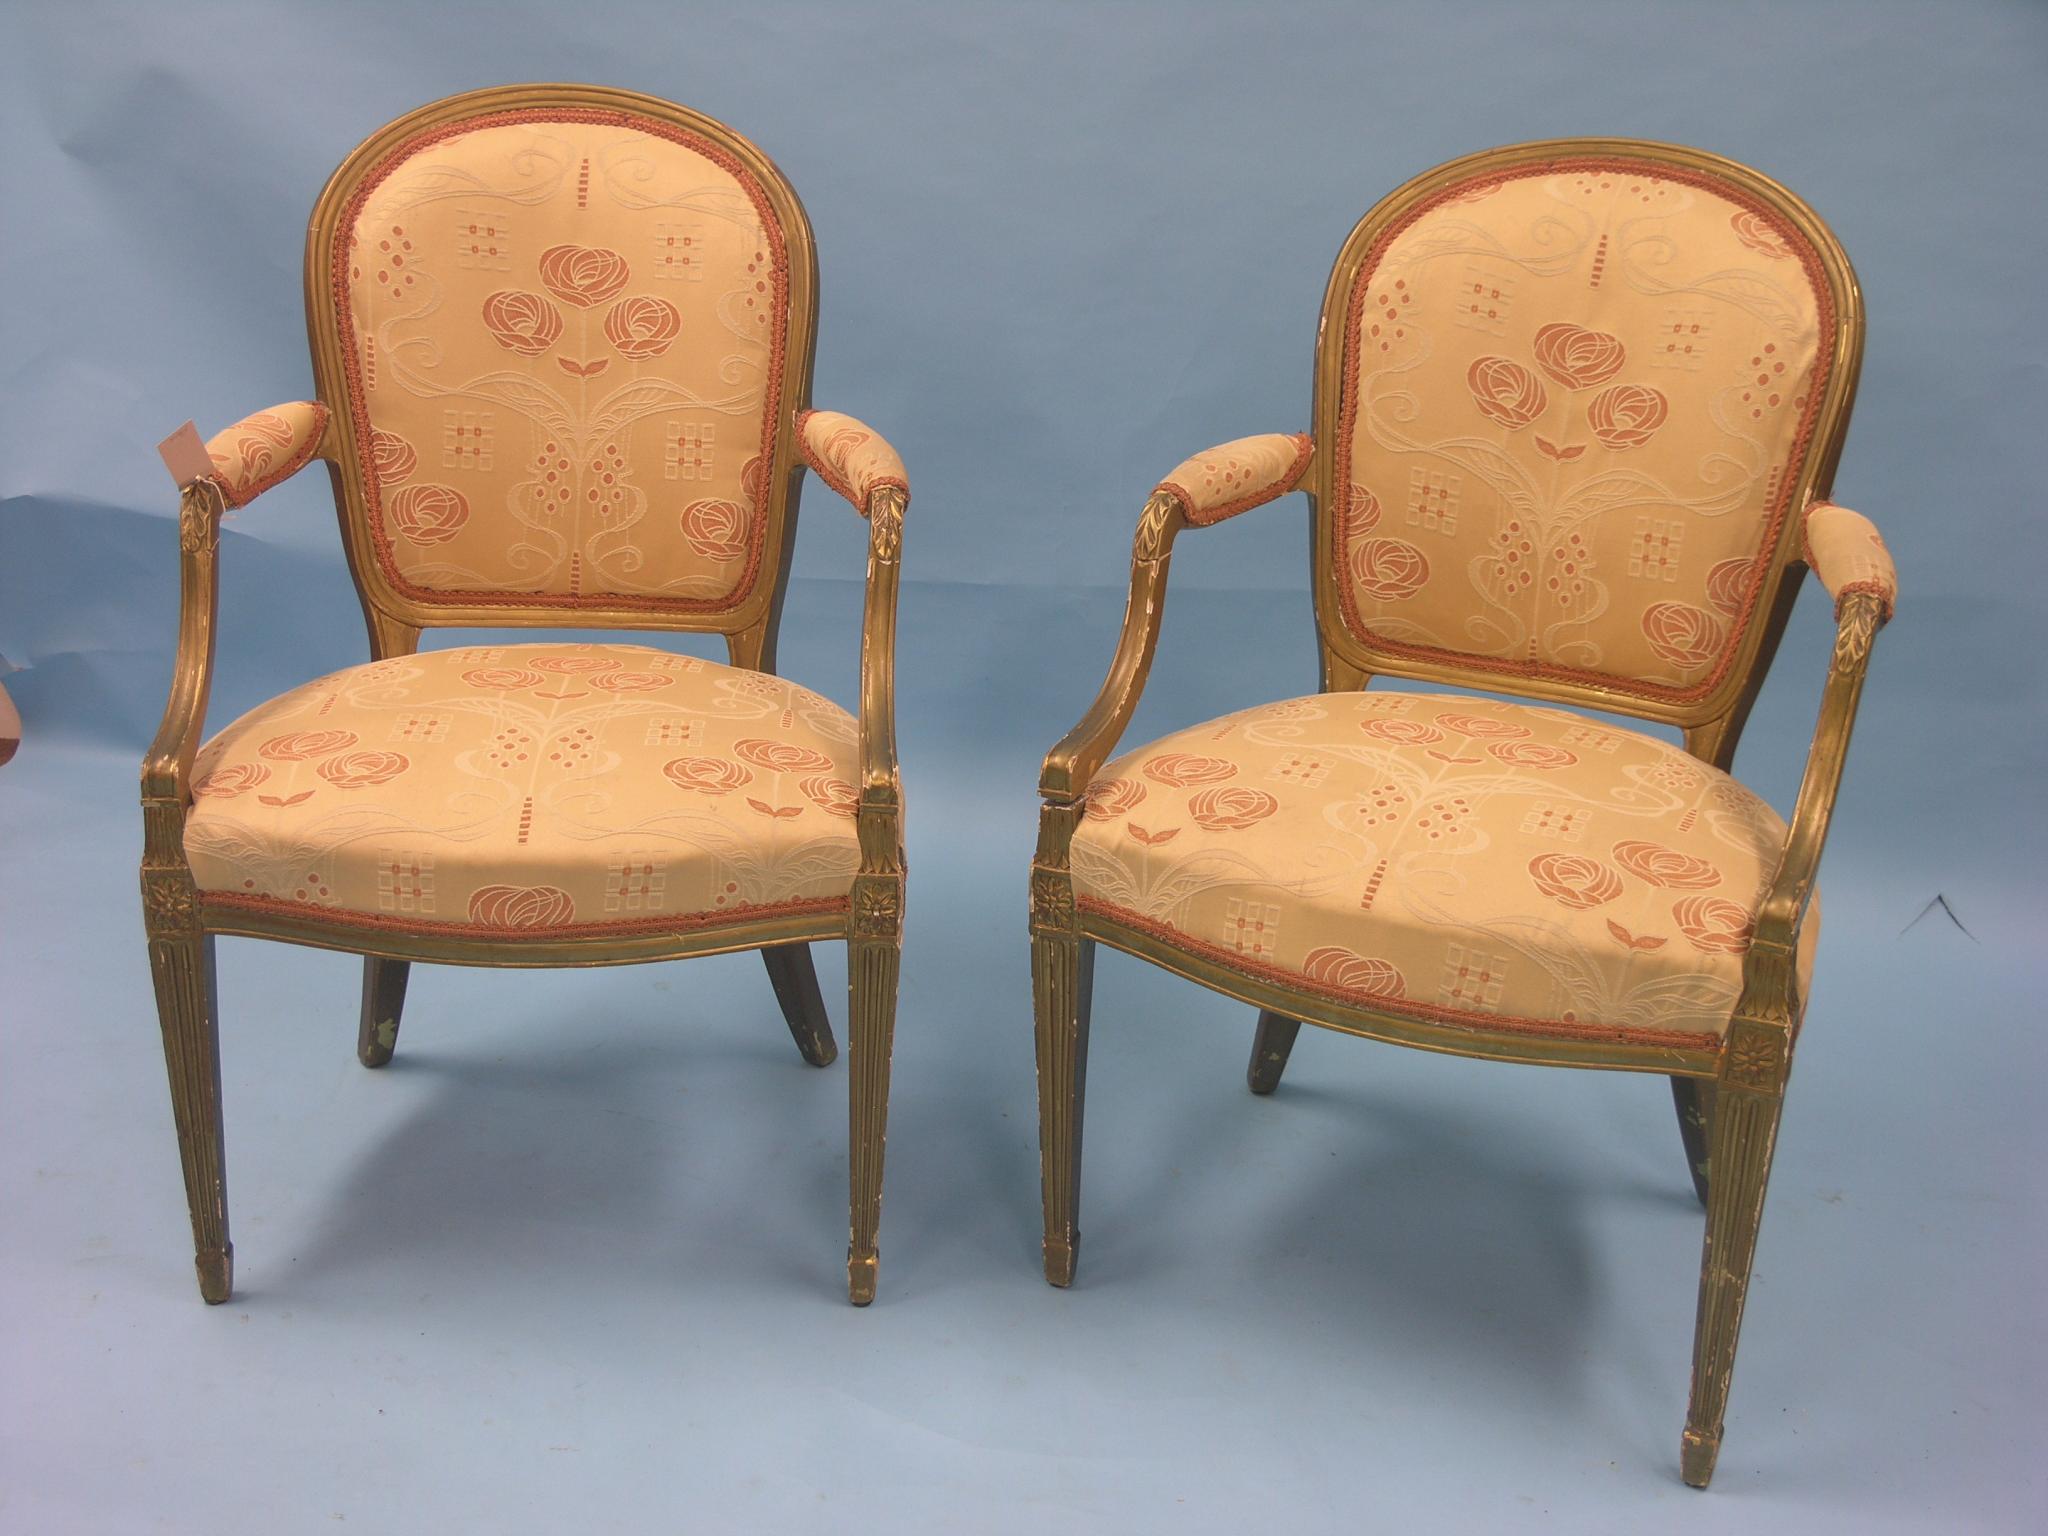 A pair of Louis XVI-style giltwood elbow chairs, upholstered in a gold floral fabric